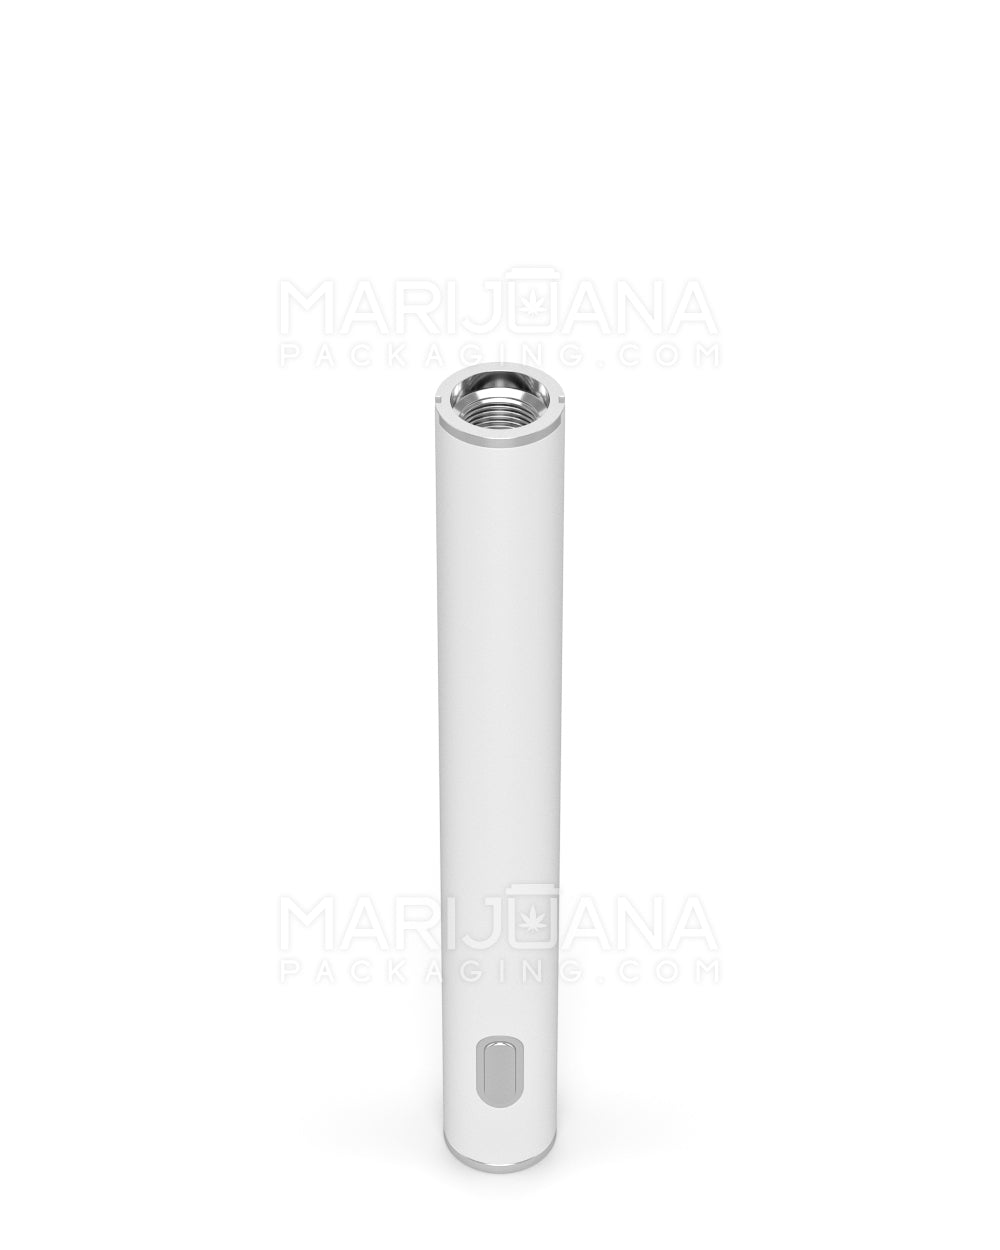 RAE | Instant Draw Activated Vape Battery | 320mAh - White - 640 Count - 3